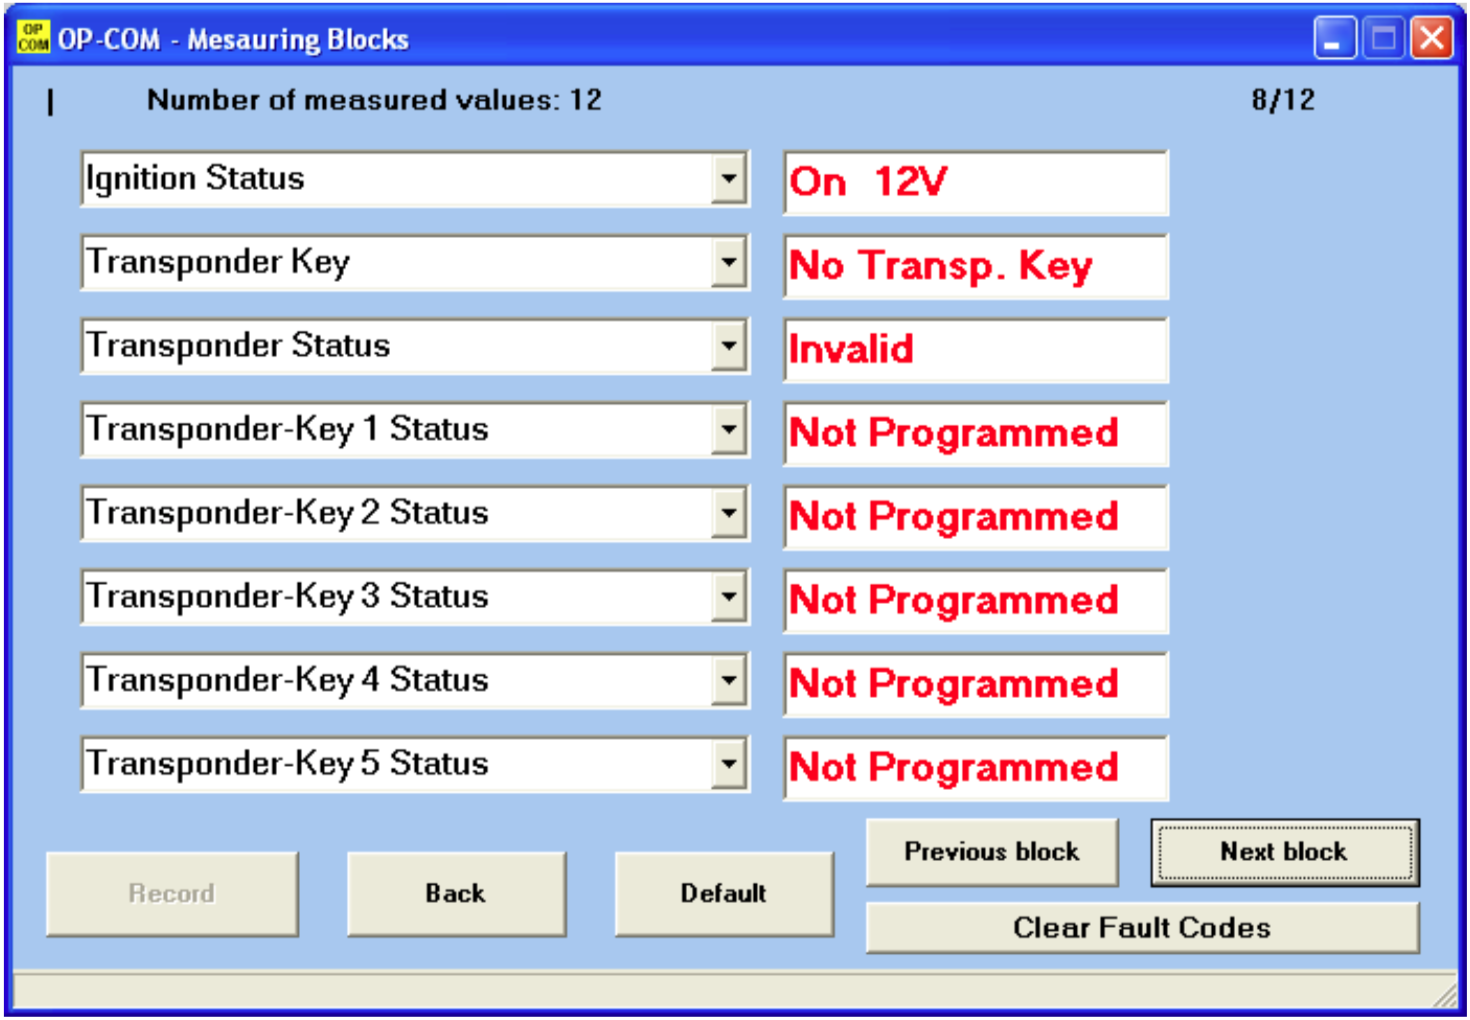 Key does not contains valid transponder